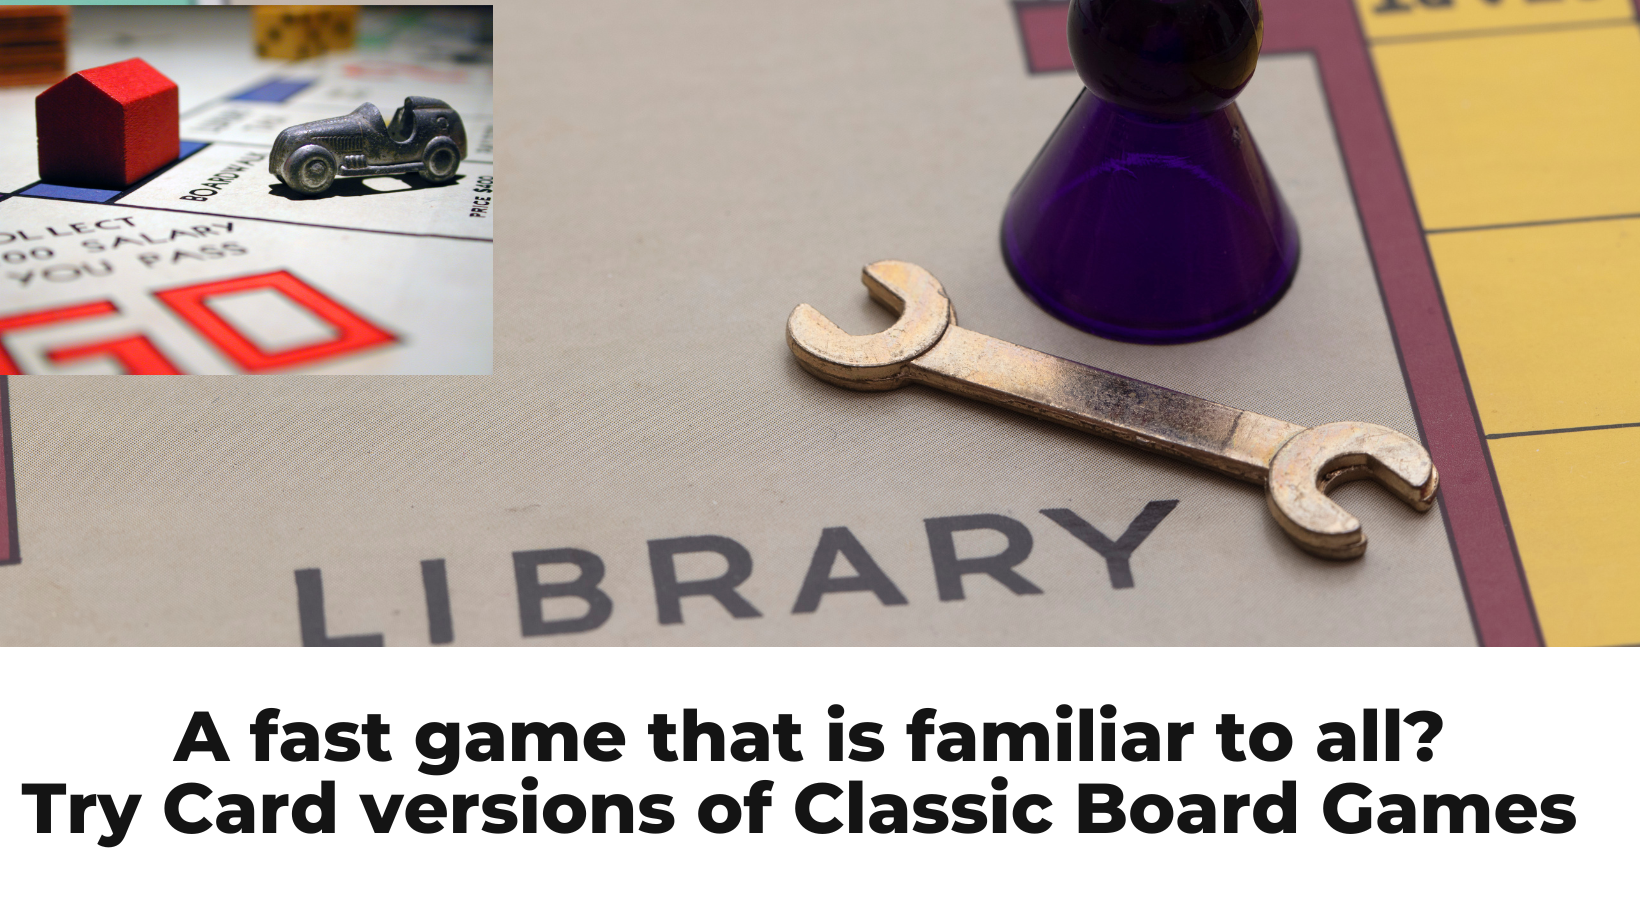 Card Versions of Classic Board Games – Familiar to all and quick to play